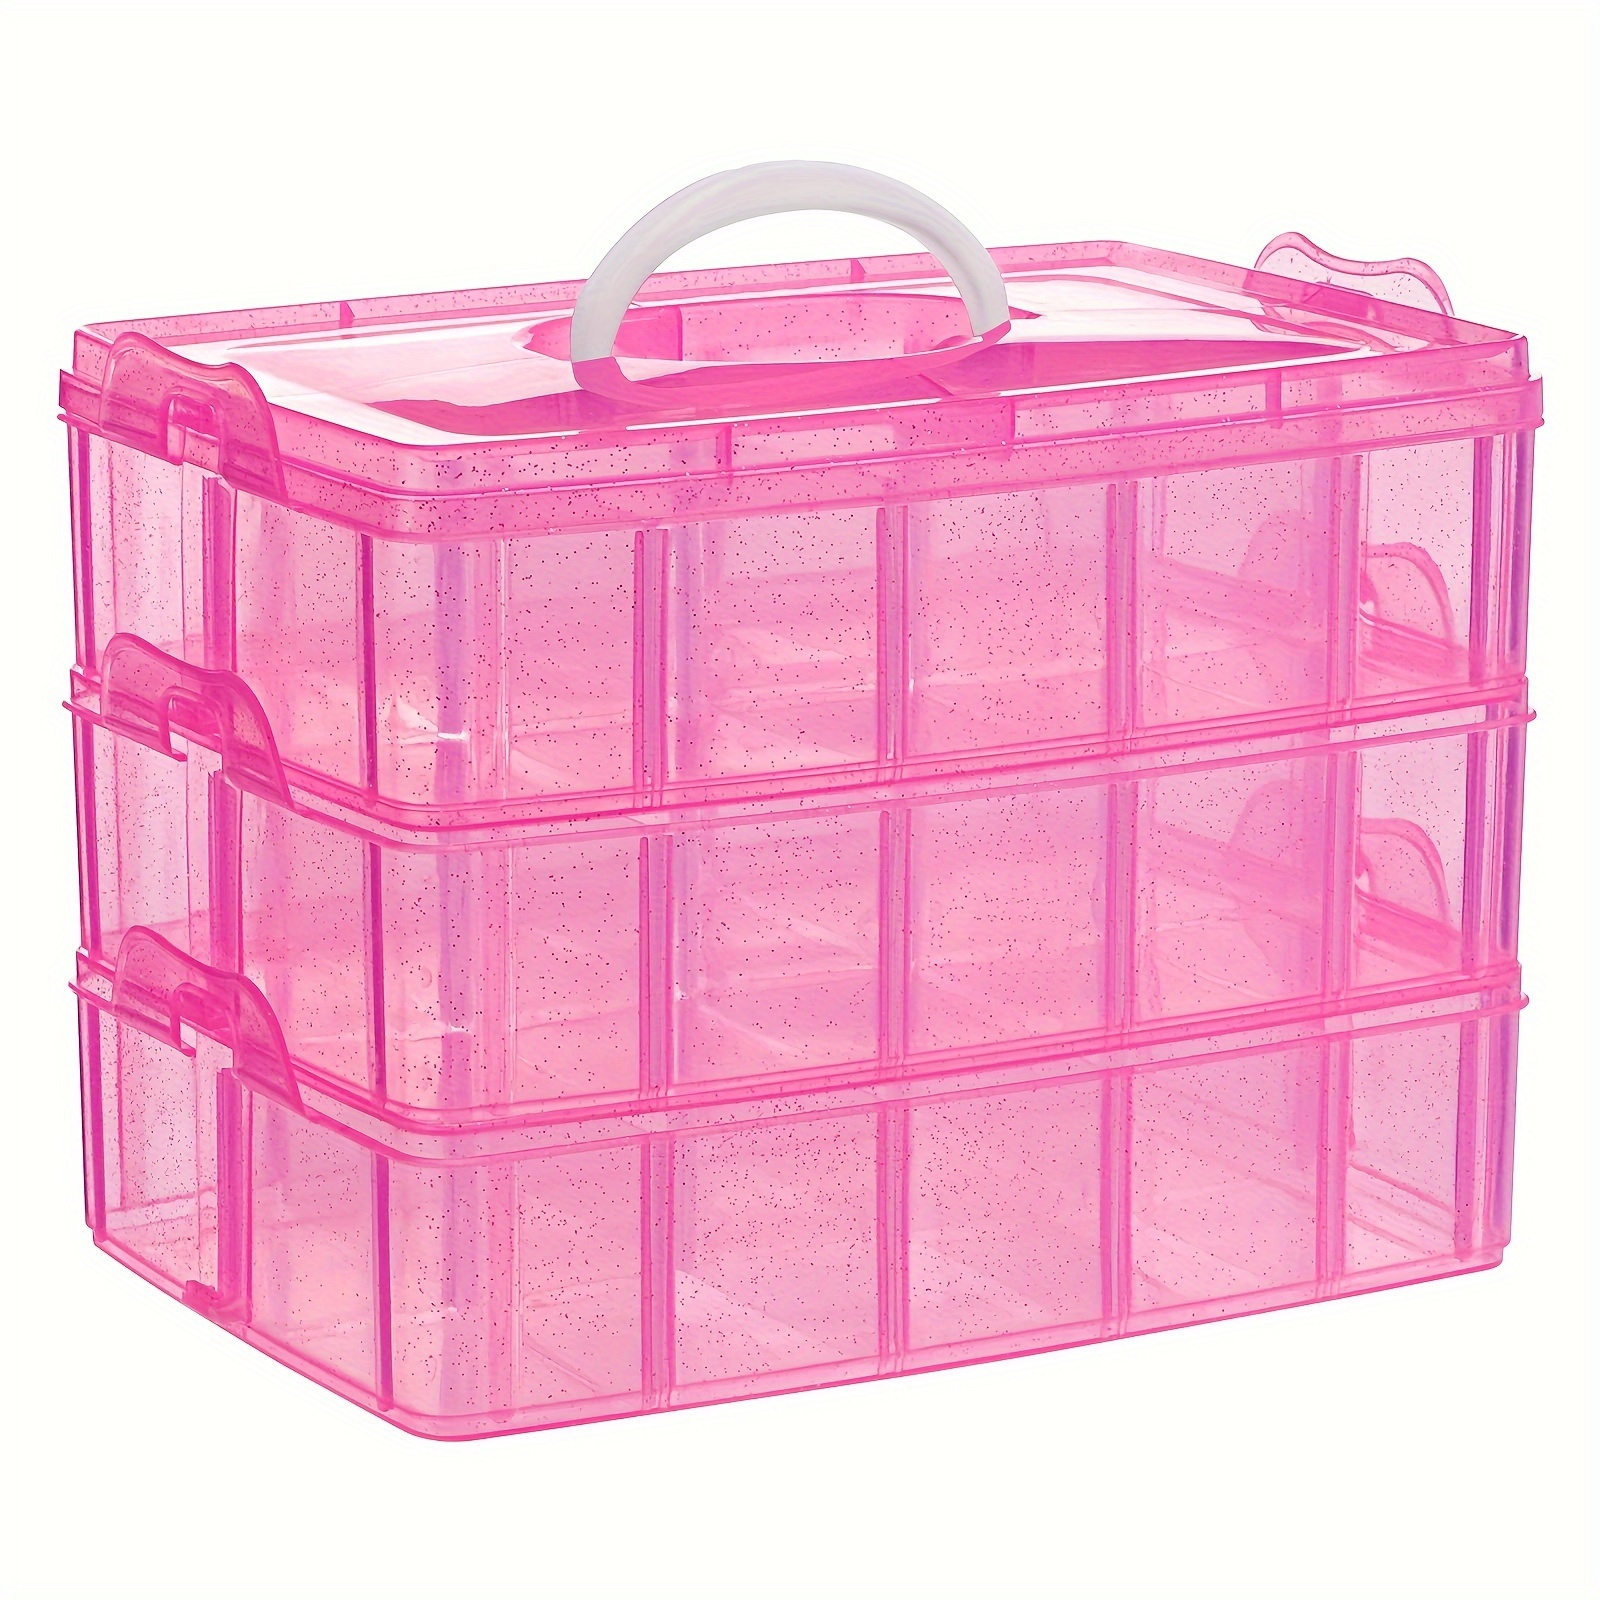 

1 Pc 3-tier Pink Craft Storage Container, Stackable Organizer Box With Dividers For Art Supplies, Beads, Washi Tapes, Seed, Hair Accessories, Nail, 9.5x6.5x7.2in